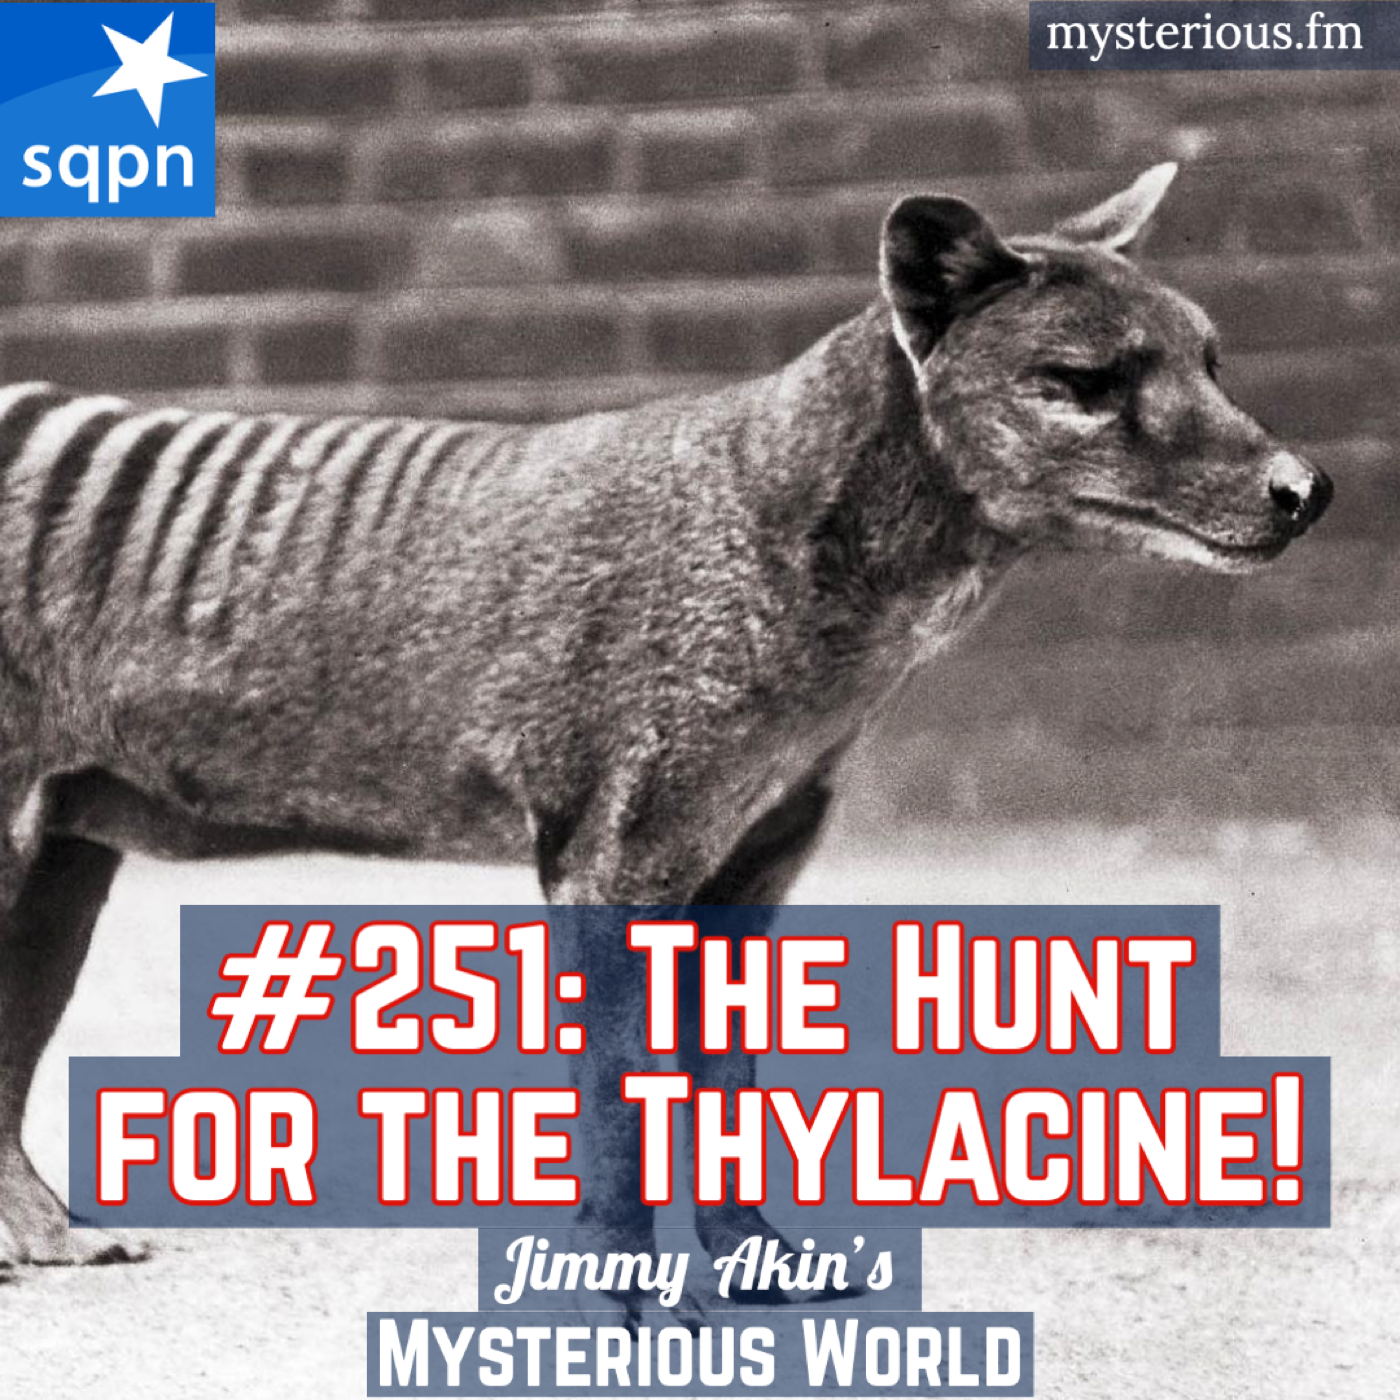 The Hunt for the Thylacine (Tasmanian Tigers, Tasmanian Wolves, Cryptids)